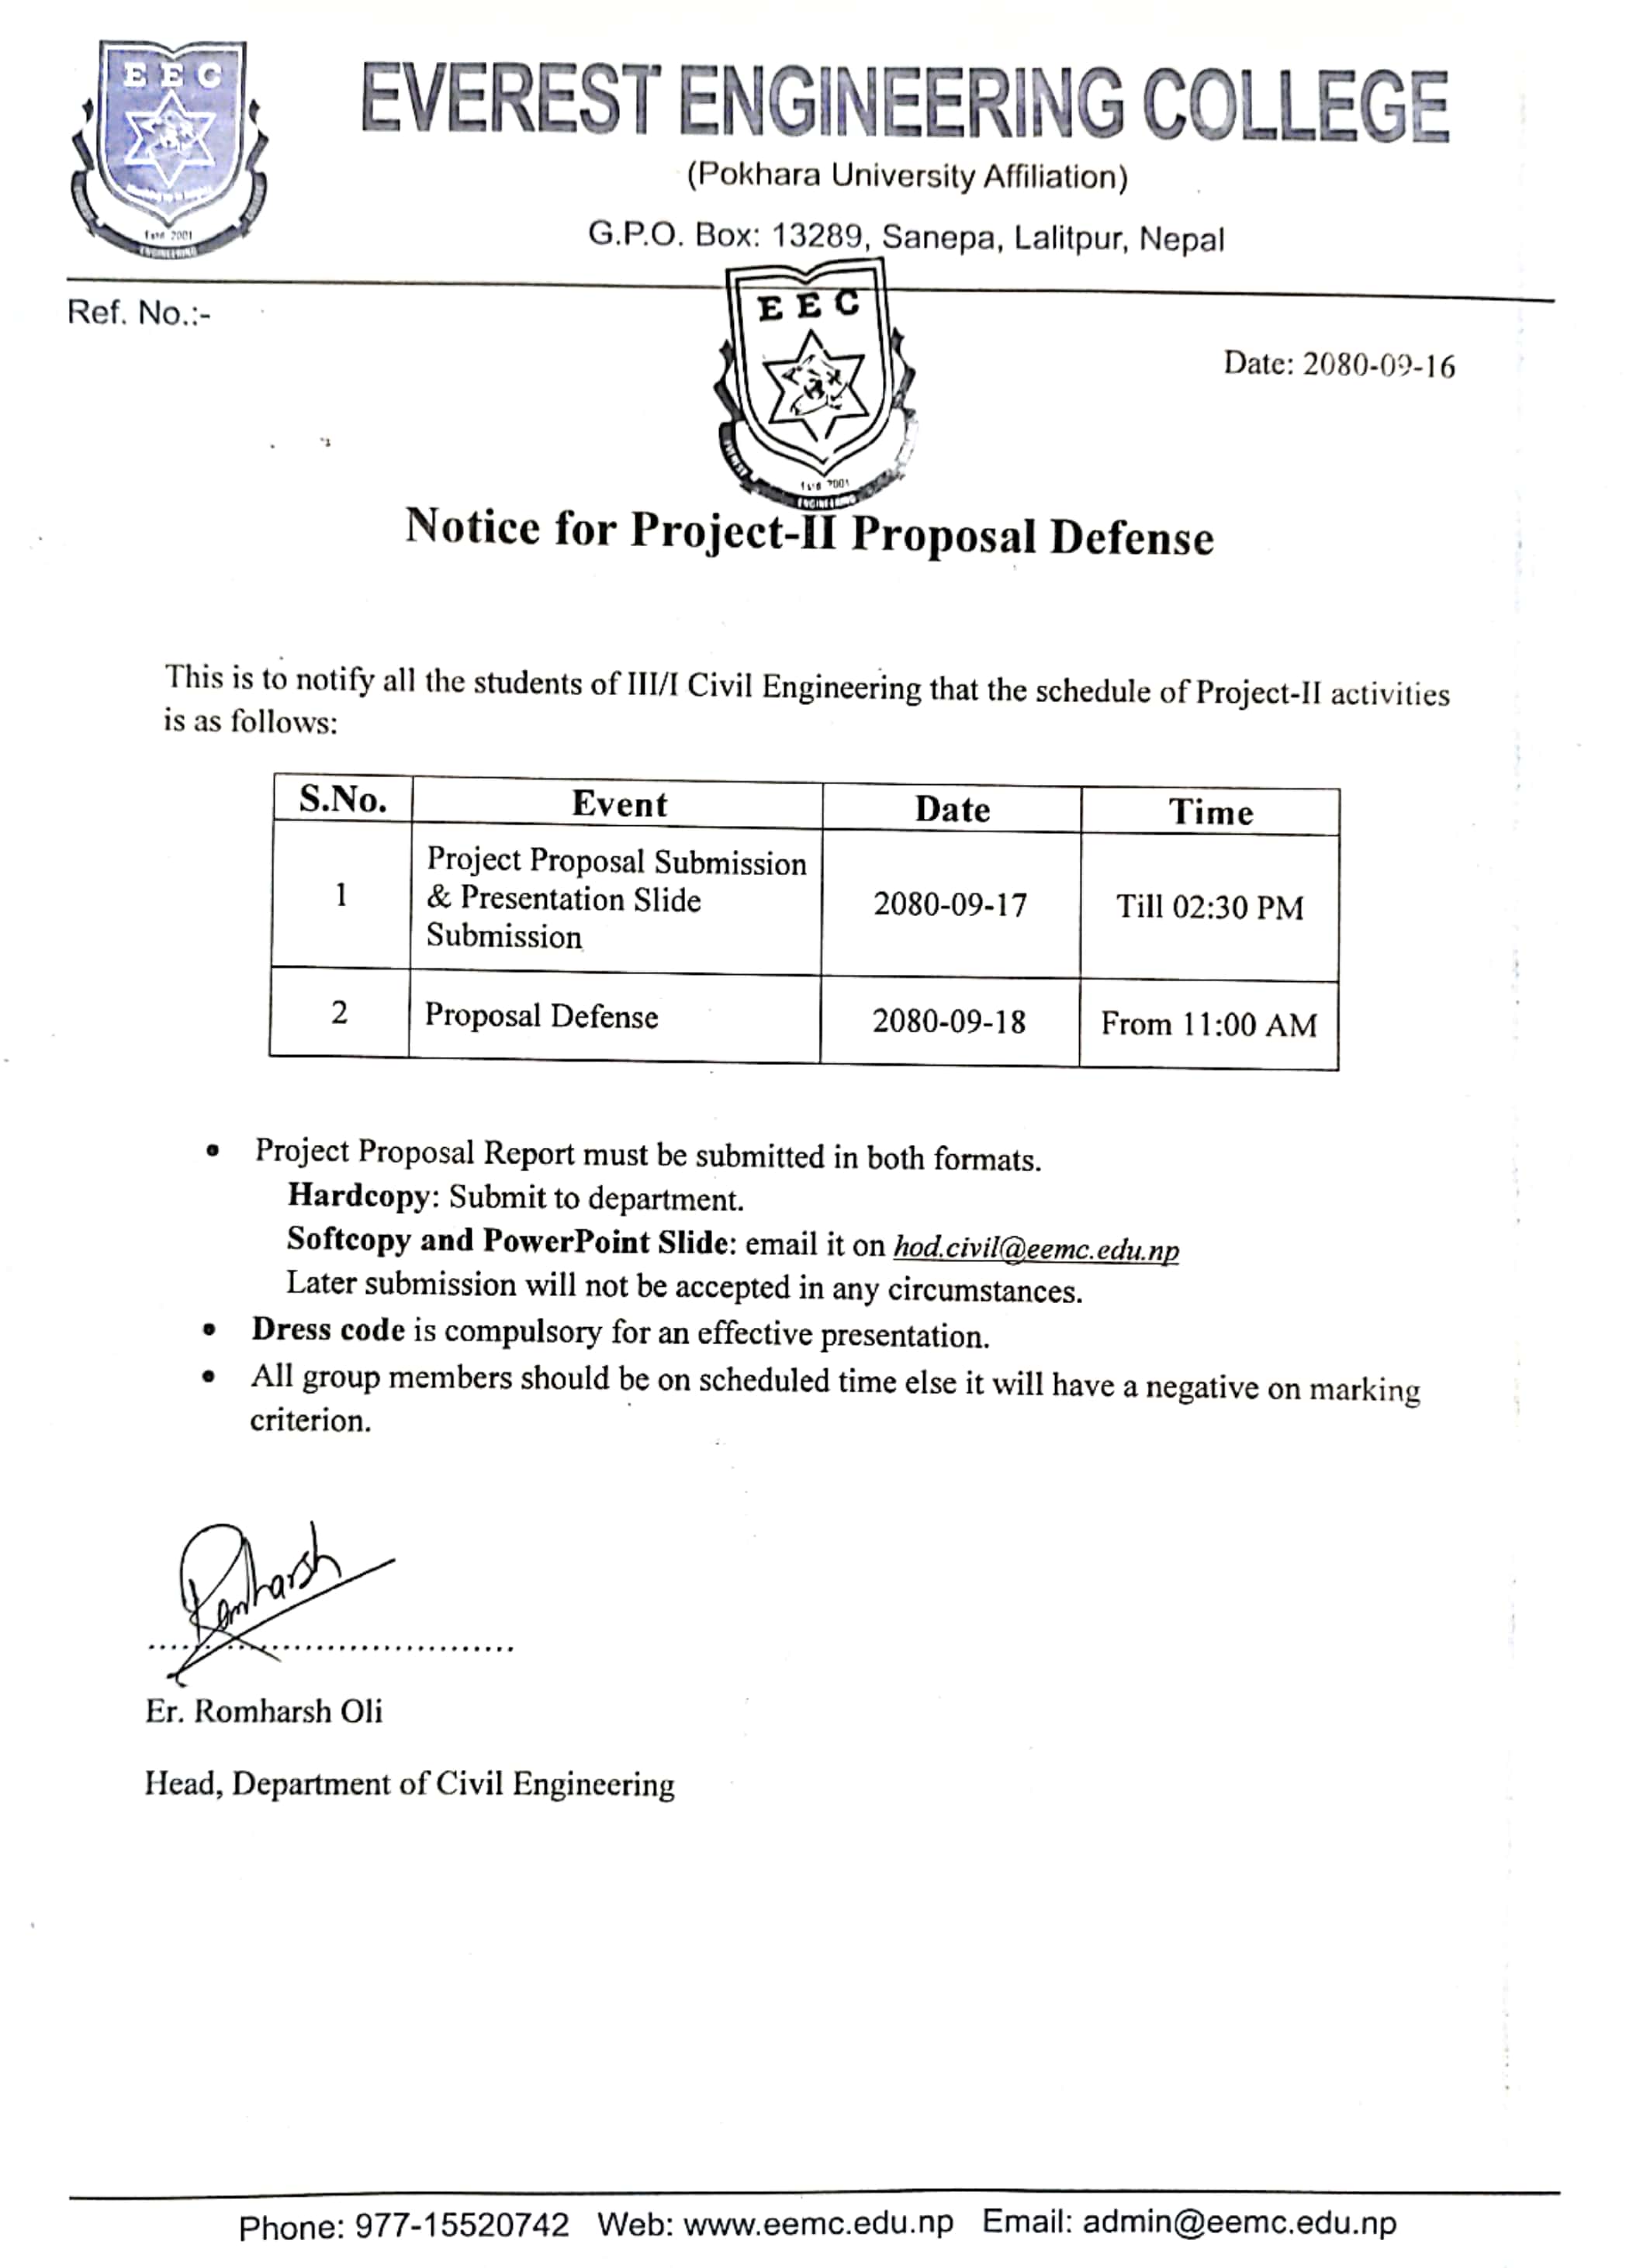 notice-for-project-proposal-defense